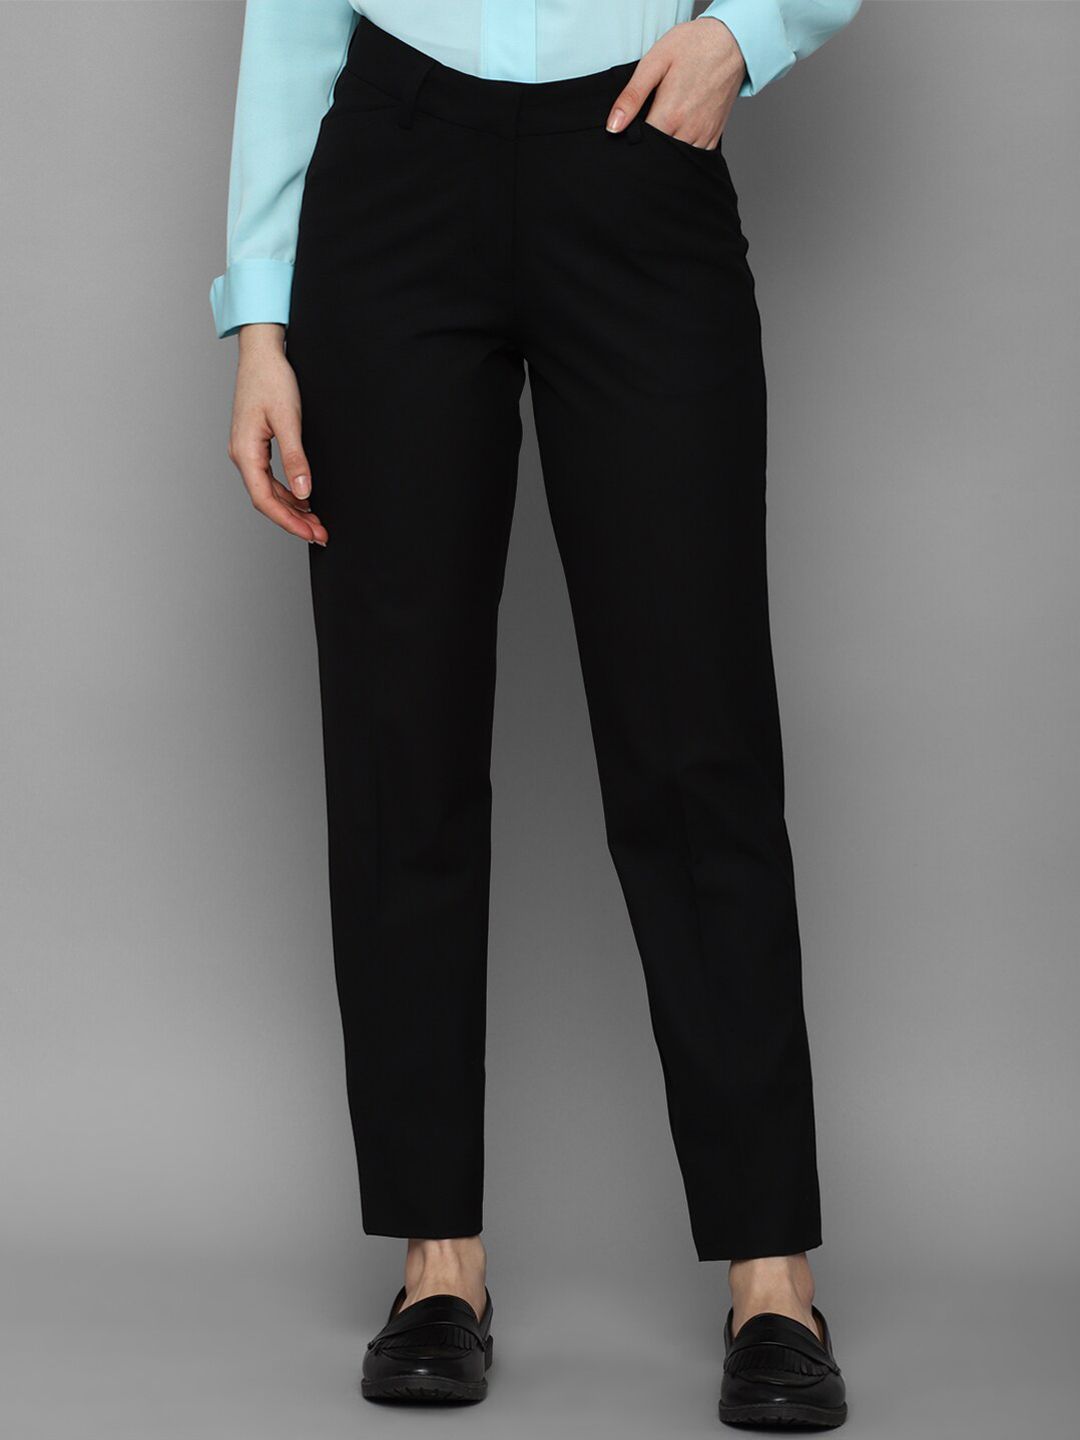 Allen Solly Woman Black Solid Trousers Price in India